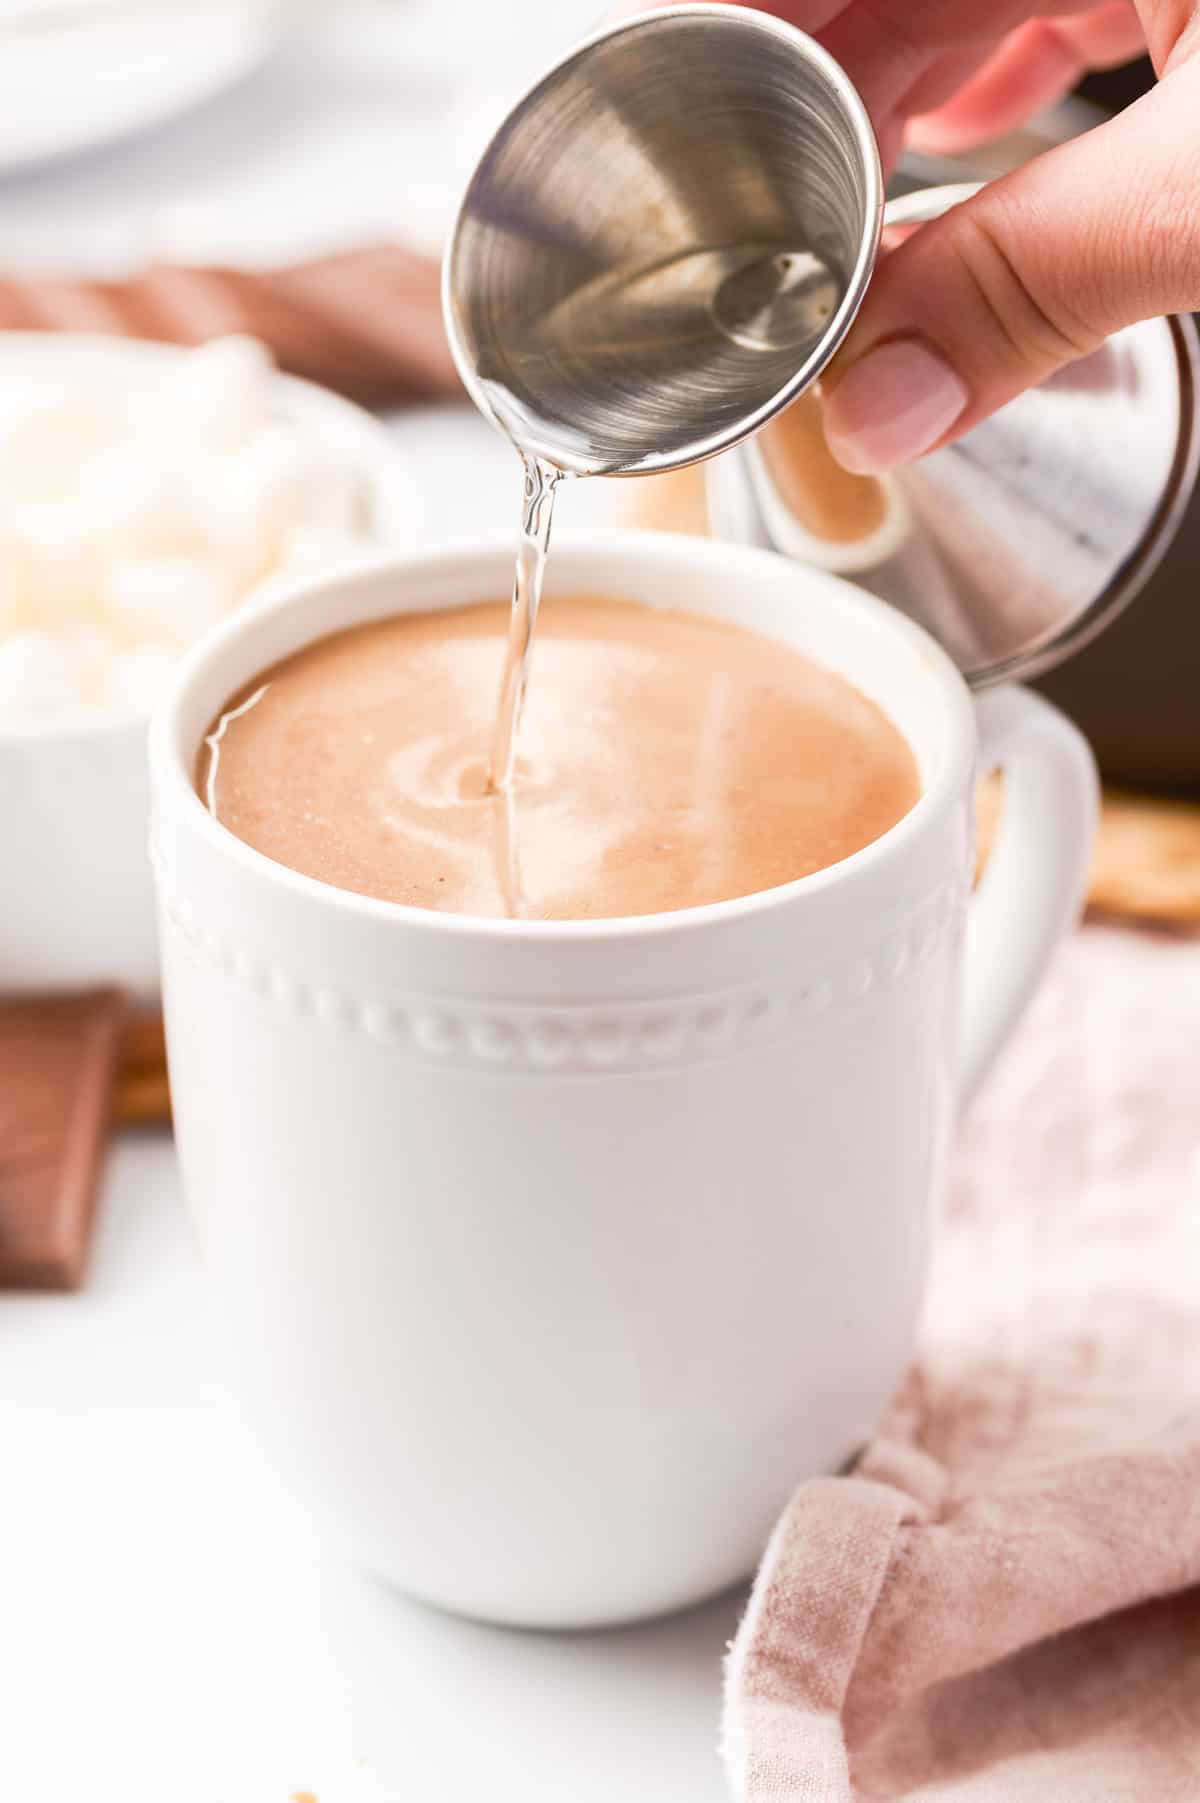 Liqueur being poured into a mug of cocoa.